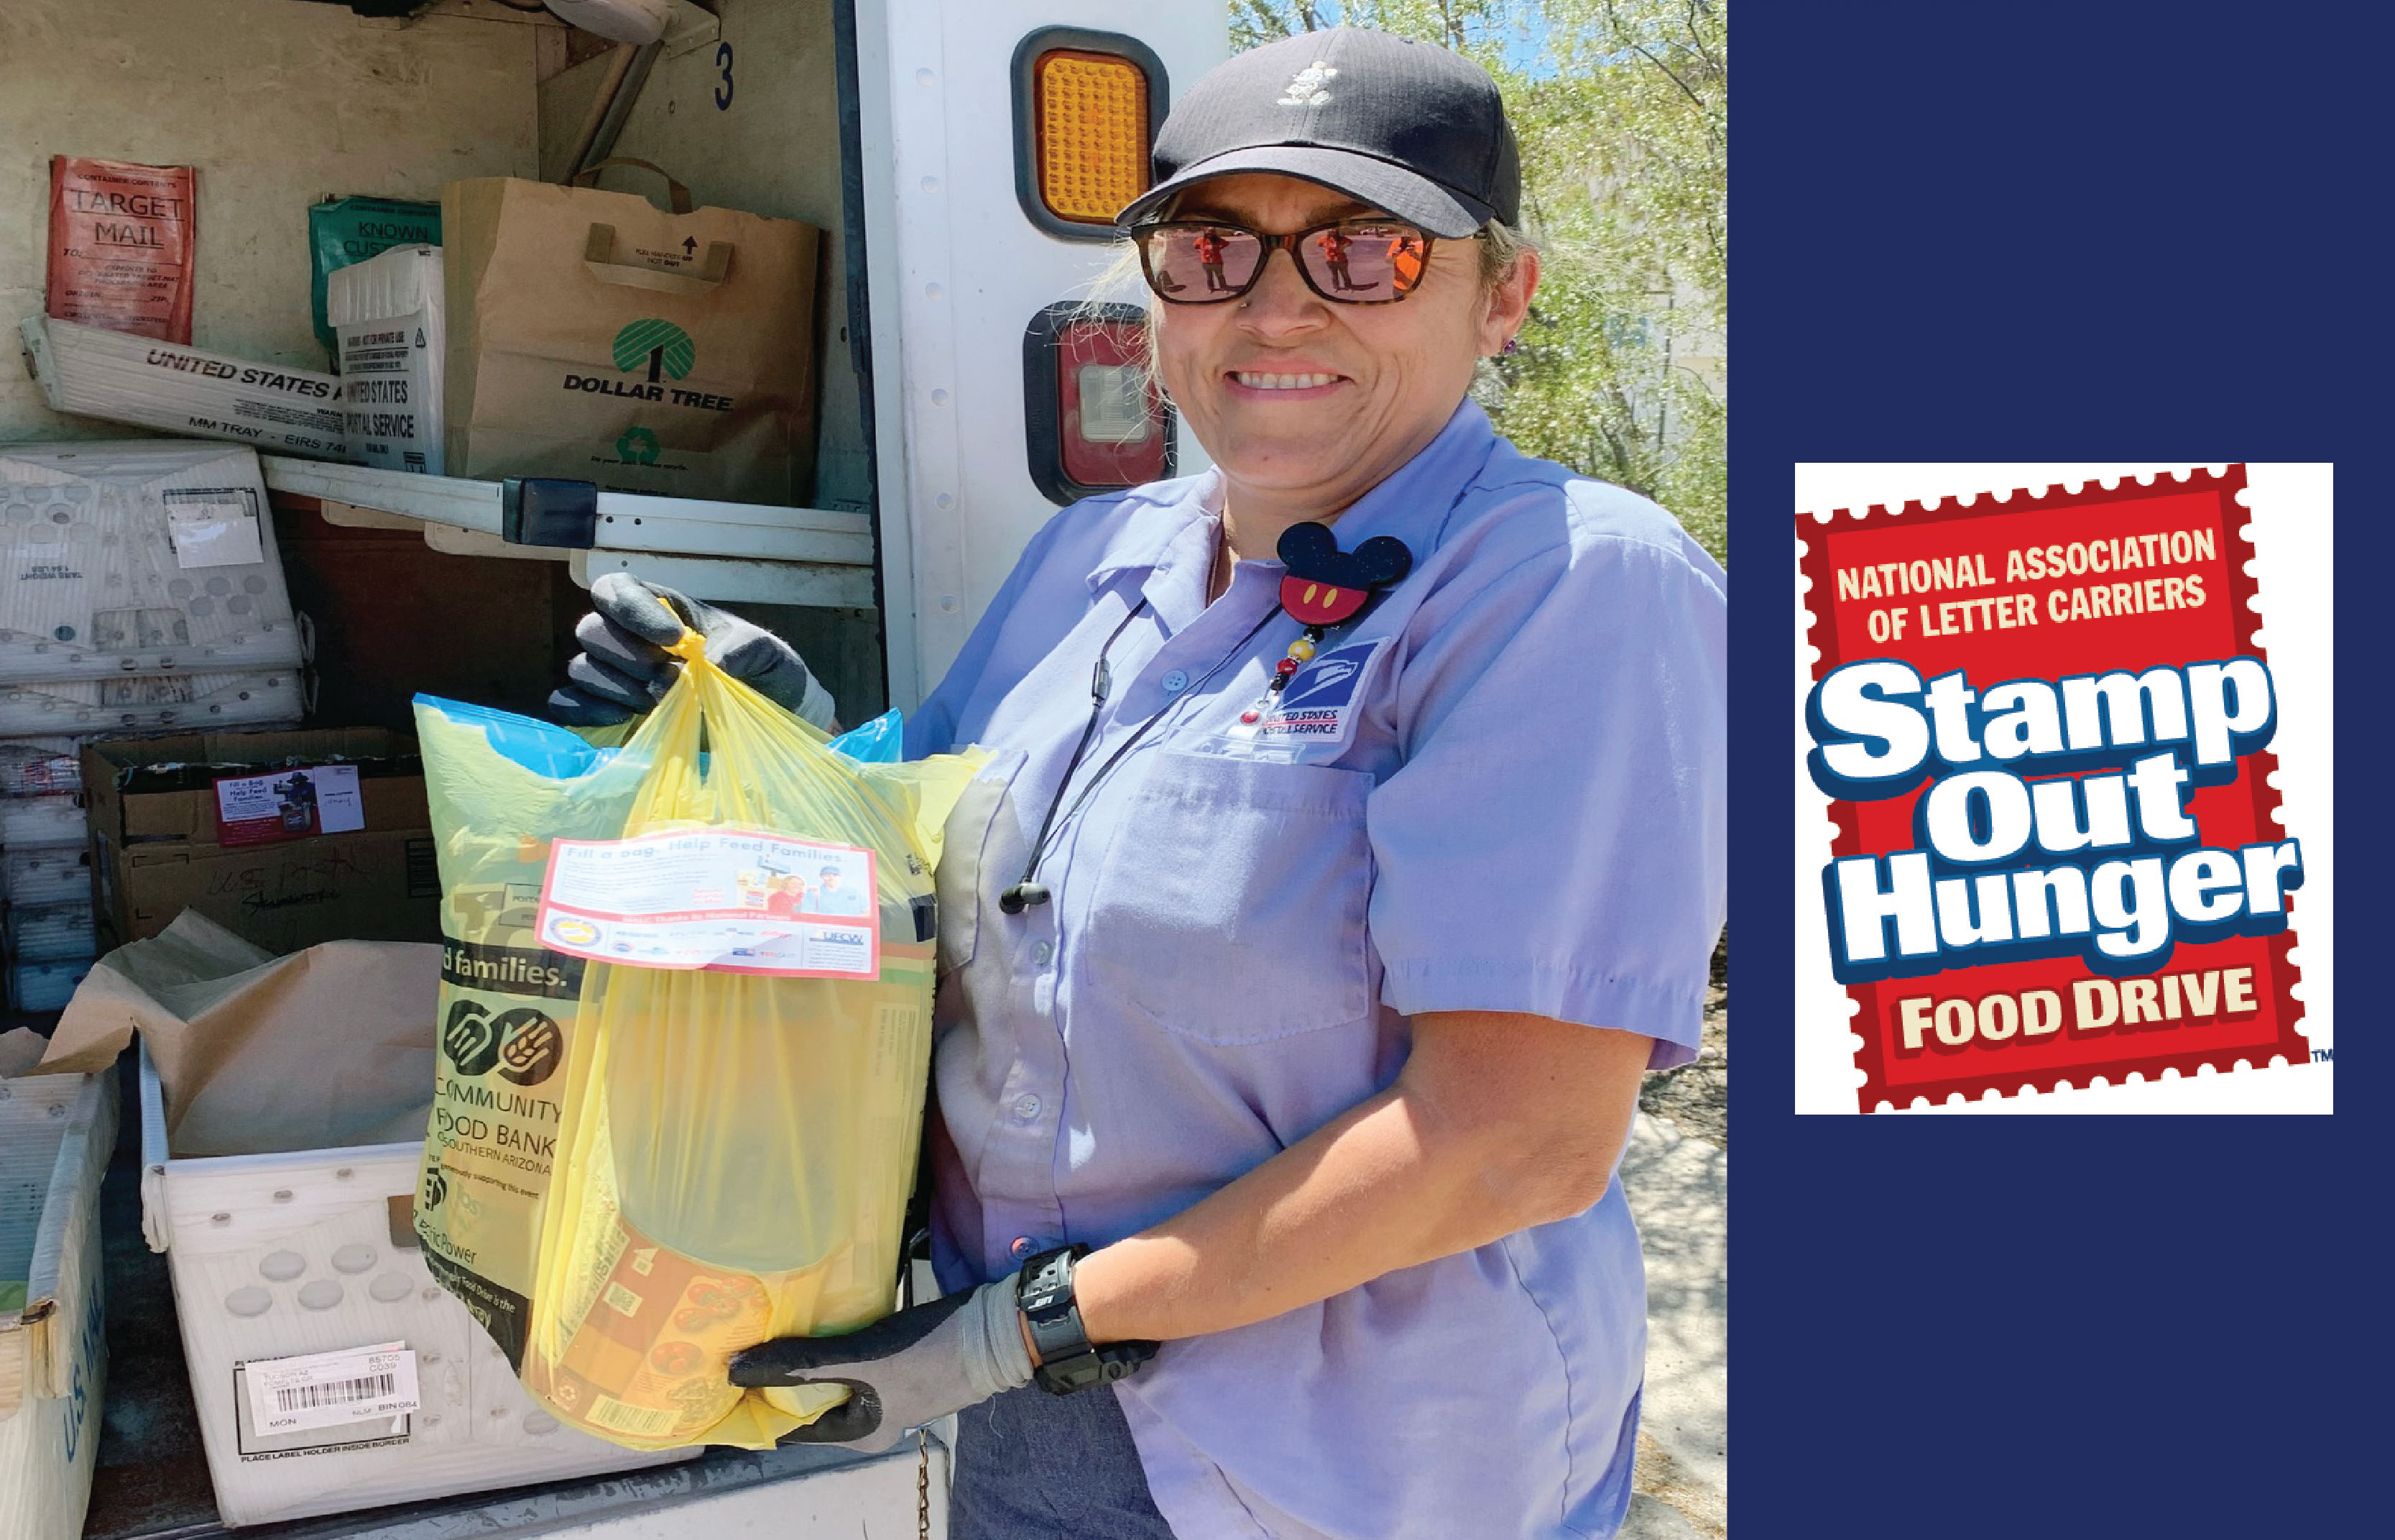 National Association of Letter Carriers to Host Stamp Out Hunger Drive on Saturday